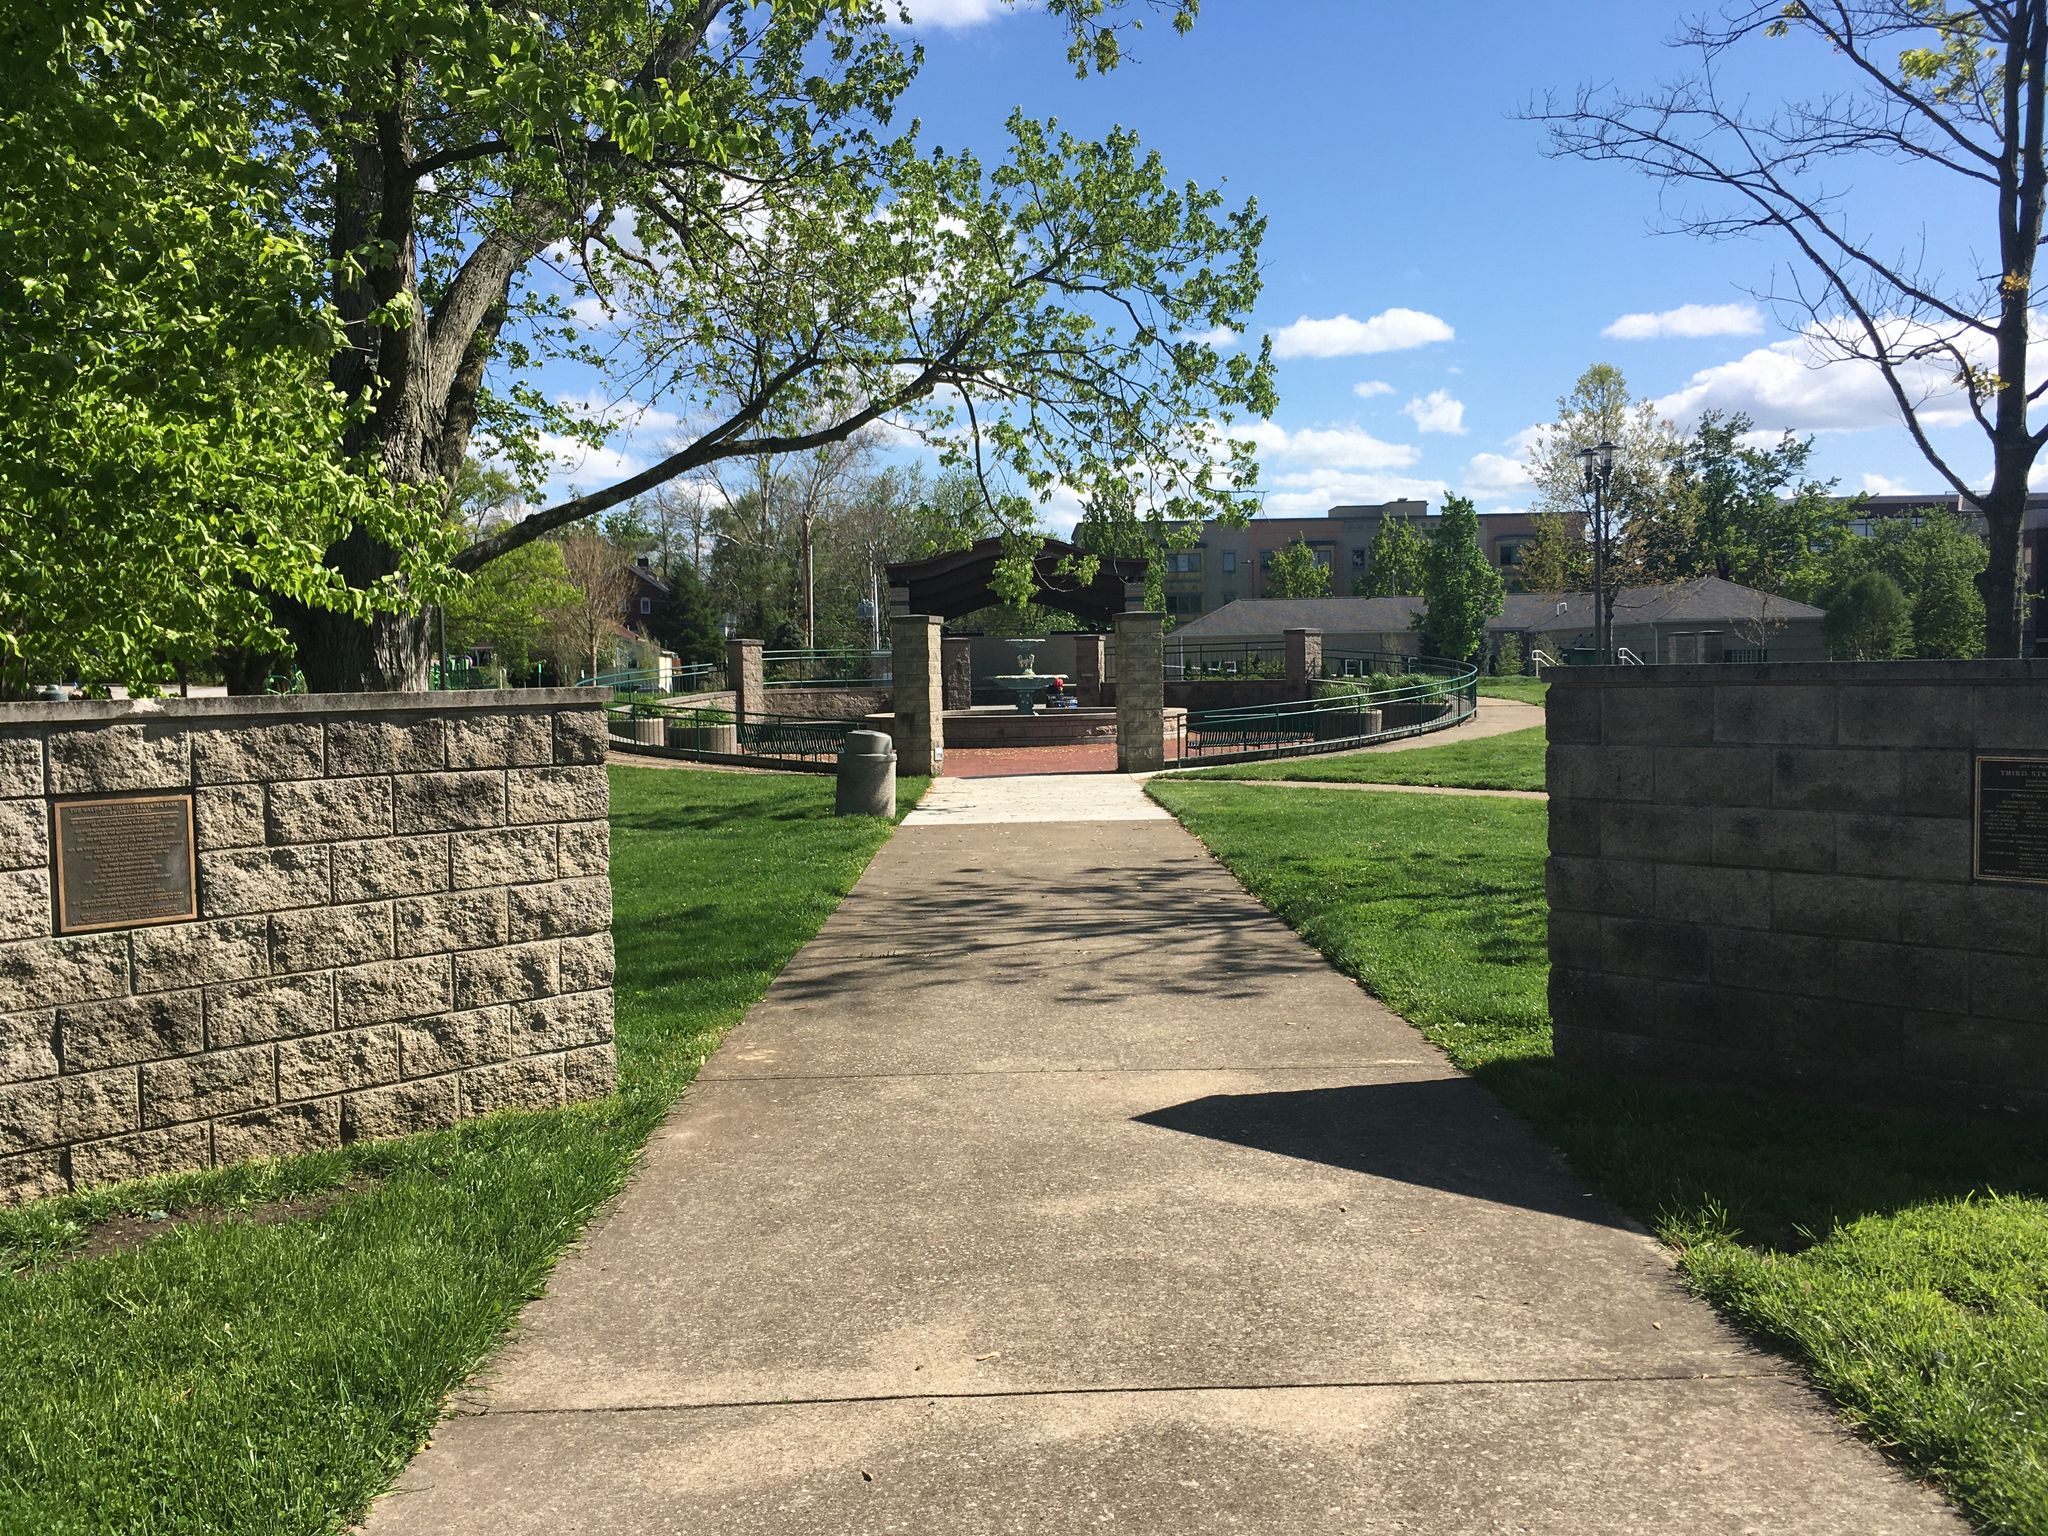 Waldron, Hill, and Buskirk Park